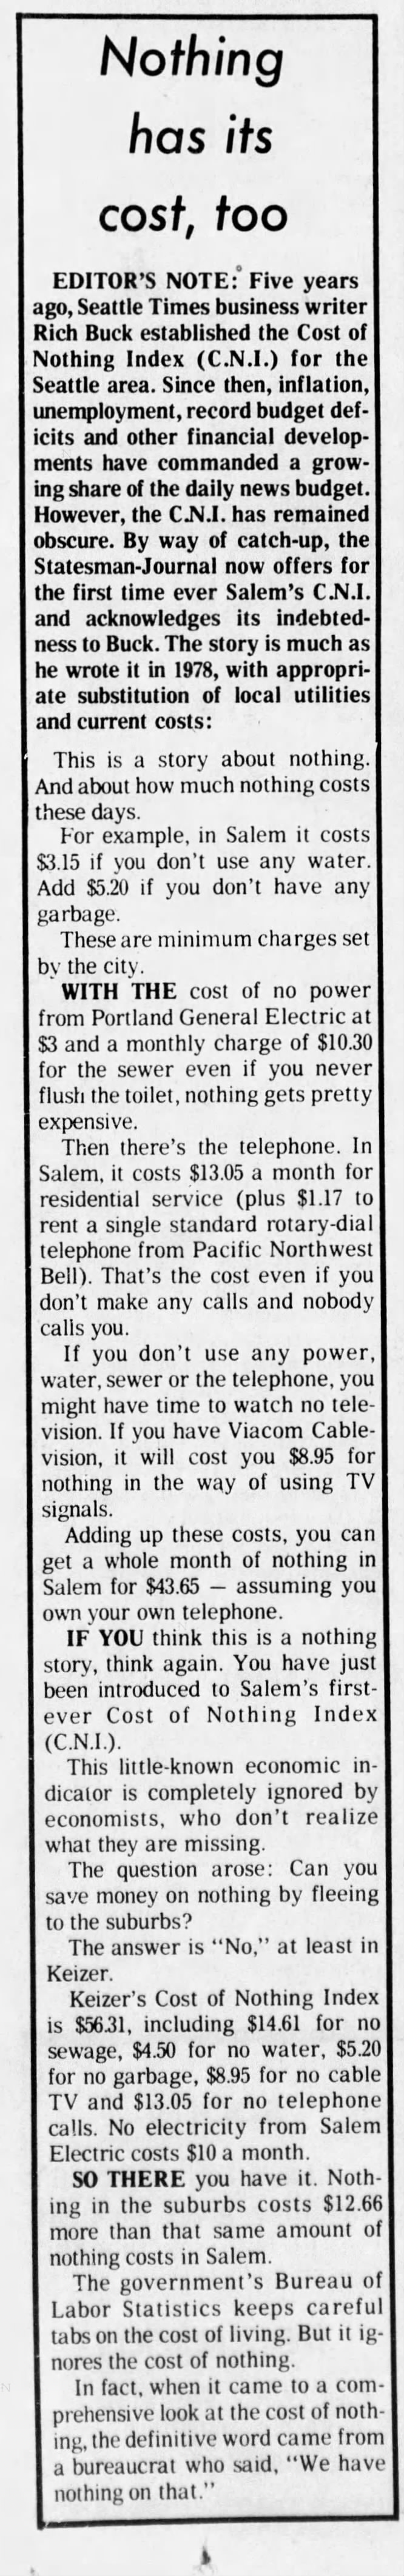 "Cost of Nothing Index", Salem, OR, Statesman-Journal July 5, 1983, p. 1.